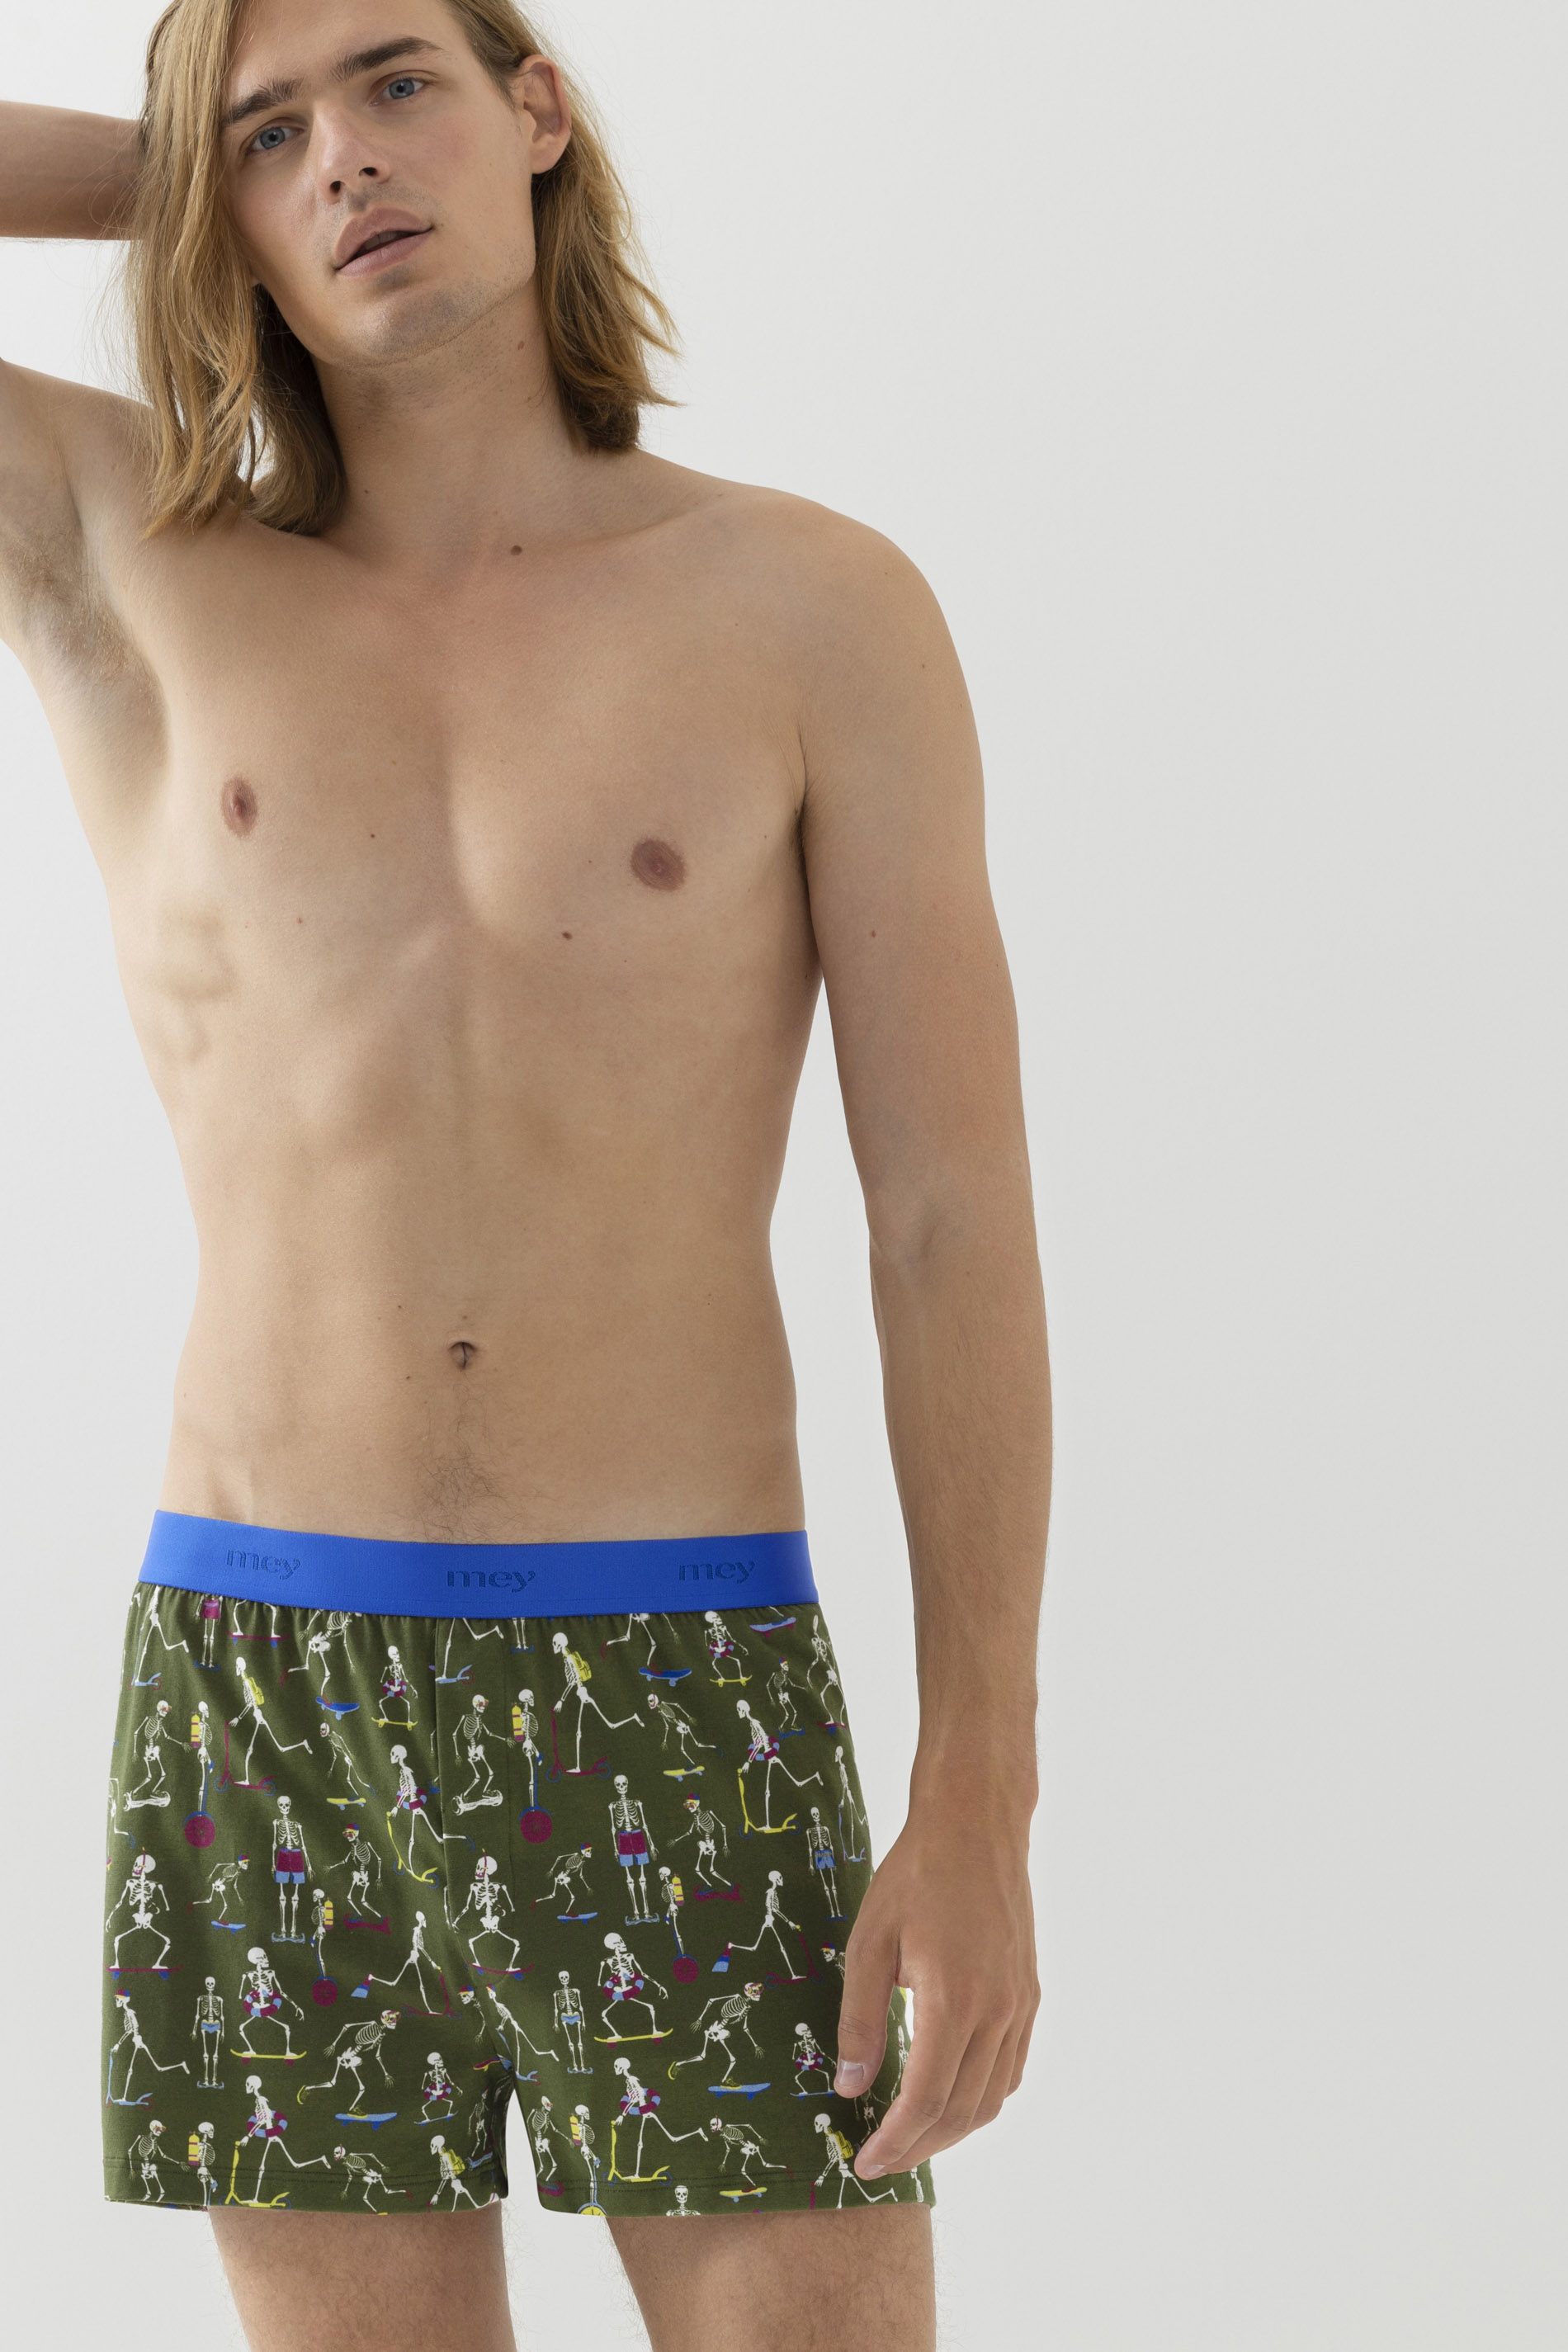 Boxer shorts Serie RE:THINK Skeleton Front View | mey®